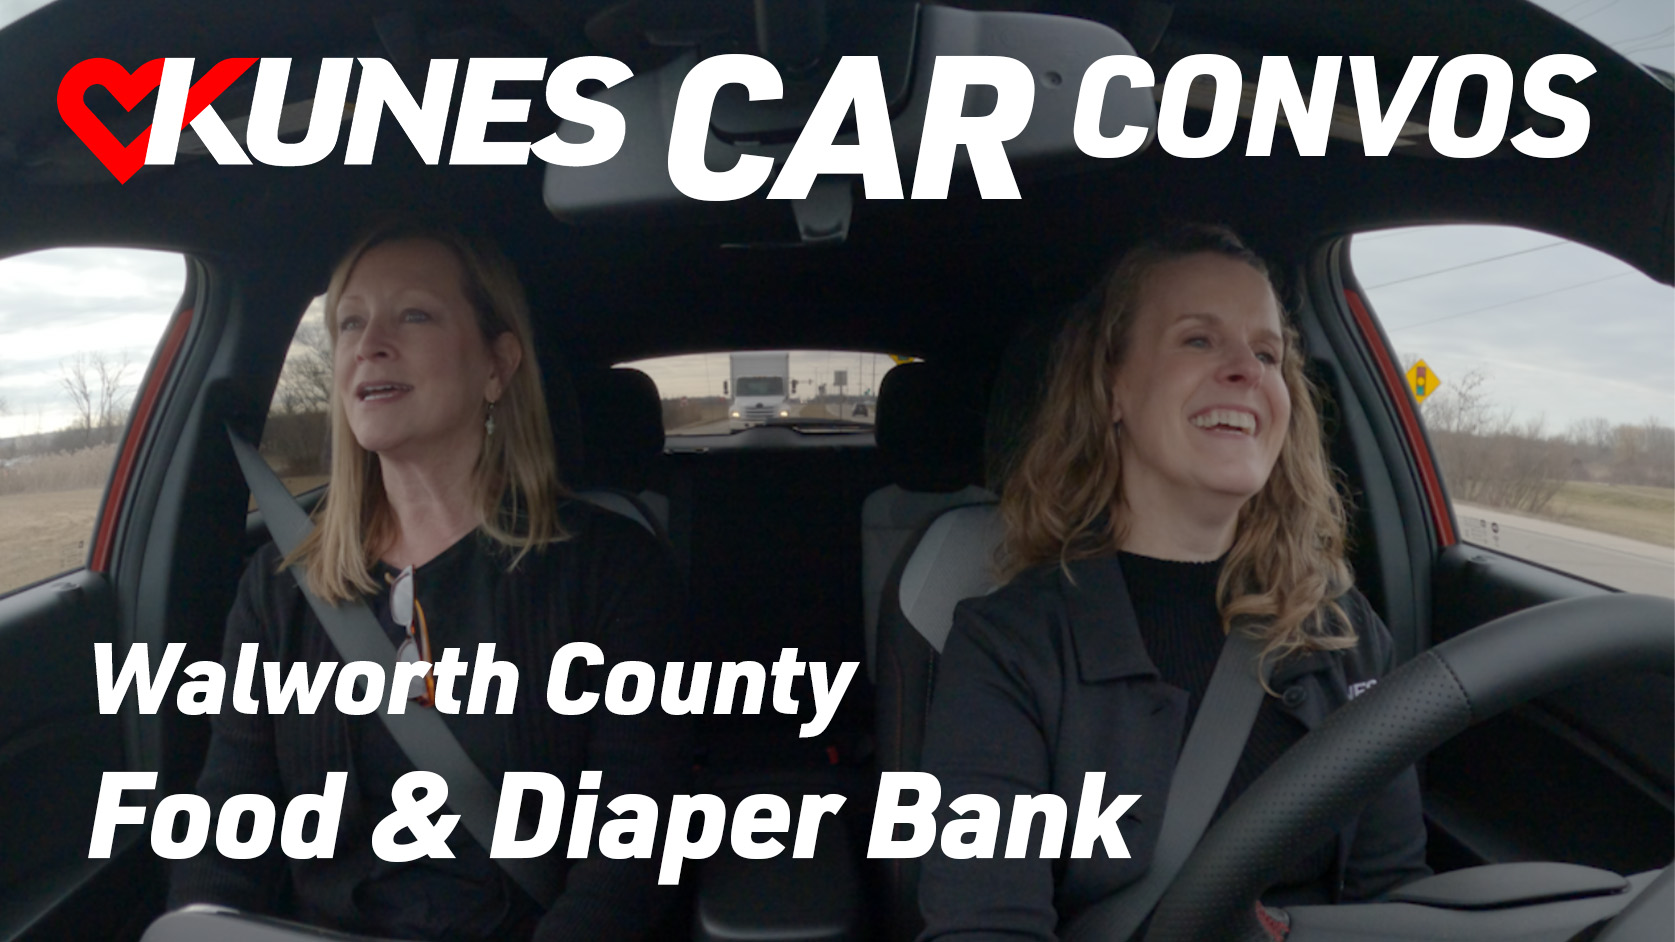 Pictured (left to right): Executive Director of Walworth County Food & Diaper Bank, Tammy Dunn, and Director of Marketing from Kunes Auto & RV Group, Jen Myers, inside of a 2024 Chevy Trax RX.
Text reads: Kunes Car Convos; Walworth County Food & Diaper Bank